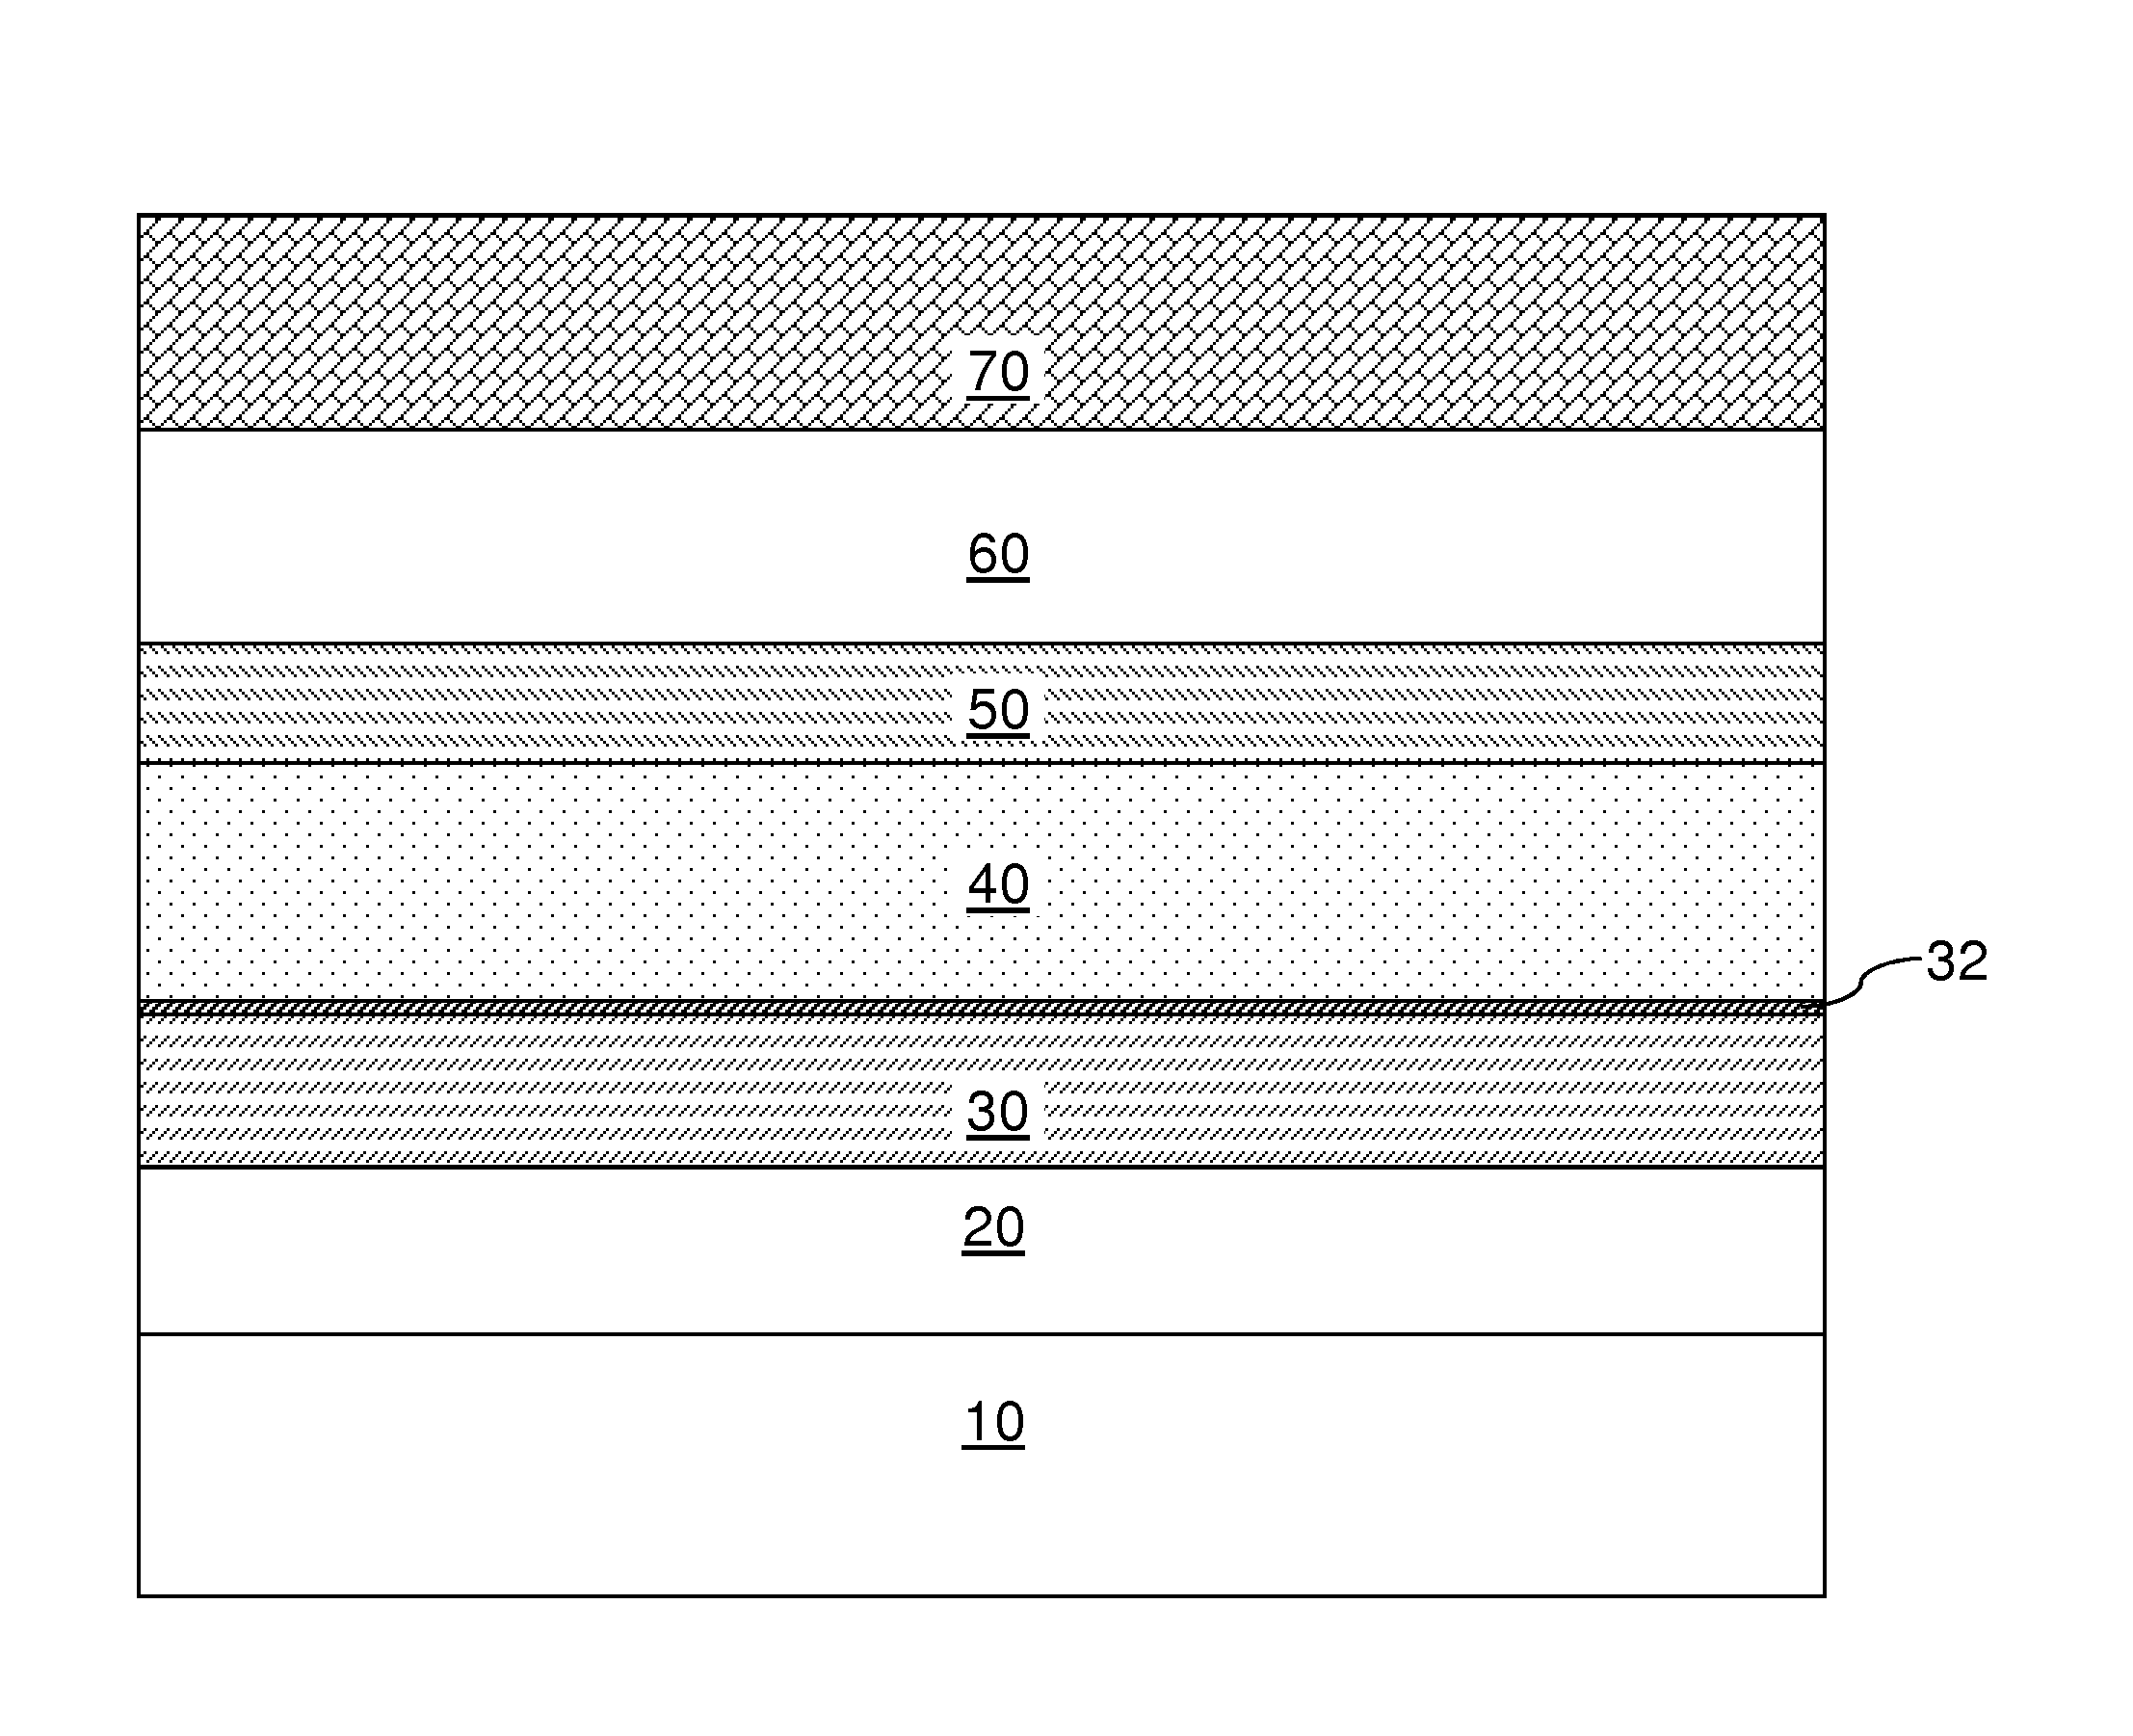 Plasma treatment at a p-i junction for increasing open circuit voltage of a photovoltaic device